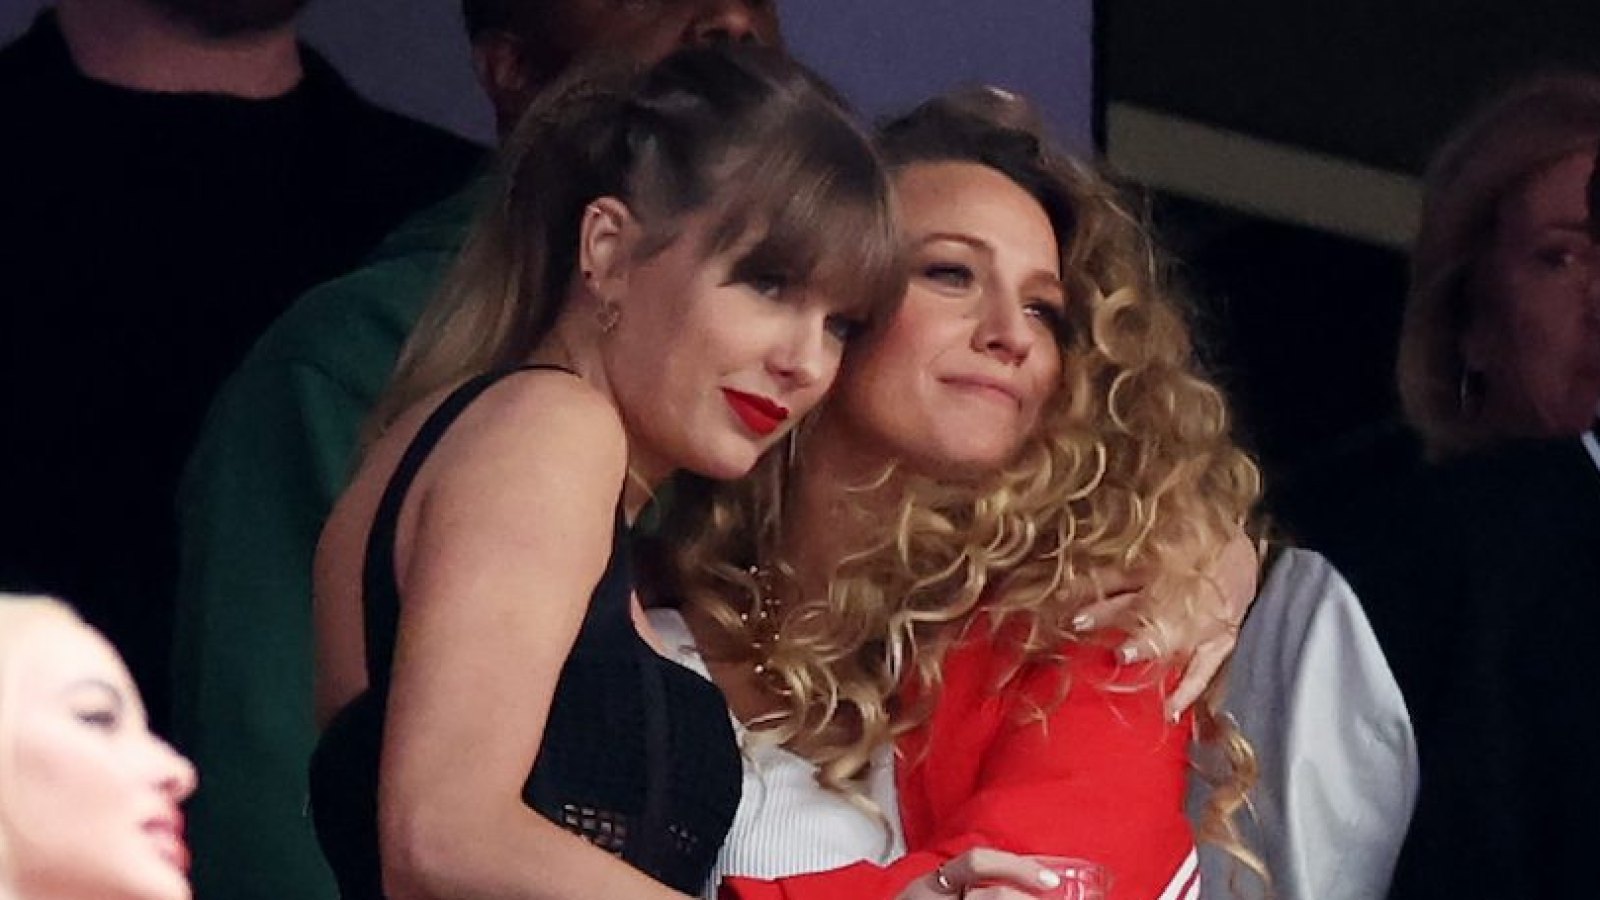 Promo Inside Taylor Swift s Friendships With Blake Lively and Ryan Reynolds